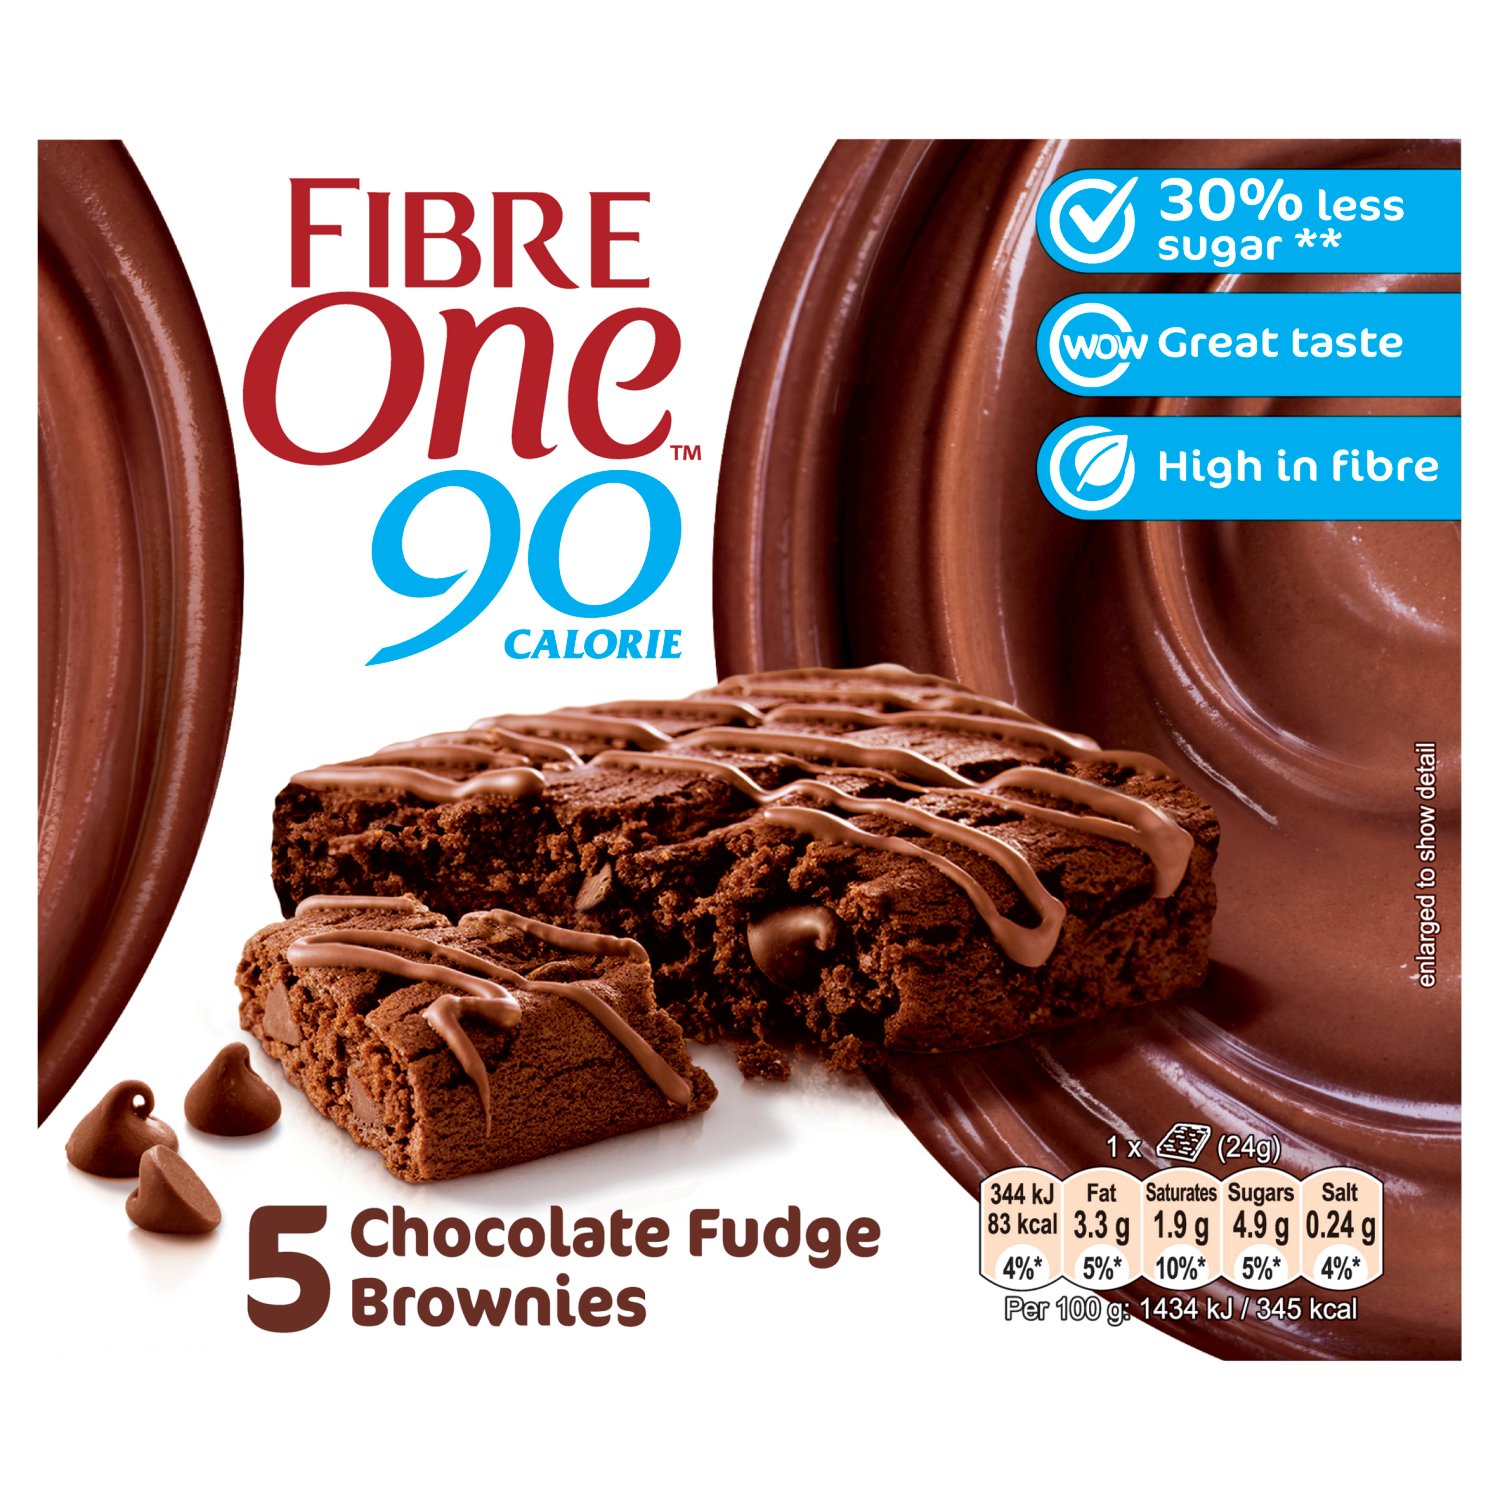 30% less sugar **

Have What You Crave!
Treat yourself to the indulgence of Fibre One Chocolate Fudge Brownies. They taste irresistably great that it's hard to believe each bar is a 90-calorie treat. When sweet cravings strike, you're always just a bite away from a guilt-free slice of heaven. 30% less sugar & fat **, 100% oh-my-gosh-that's delicious. With Fibre One, you can have your cake and eat it too!

**Fibre One 90 Calorie Chocolate Fudge Brownies contains at least 30% more fibre and 30% less sugar & fat than average UK brownies, November 2020.